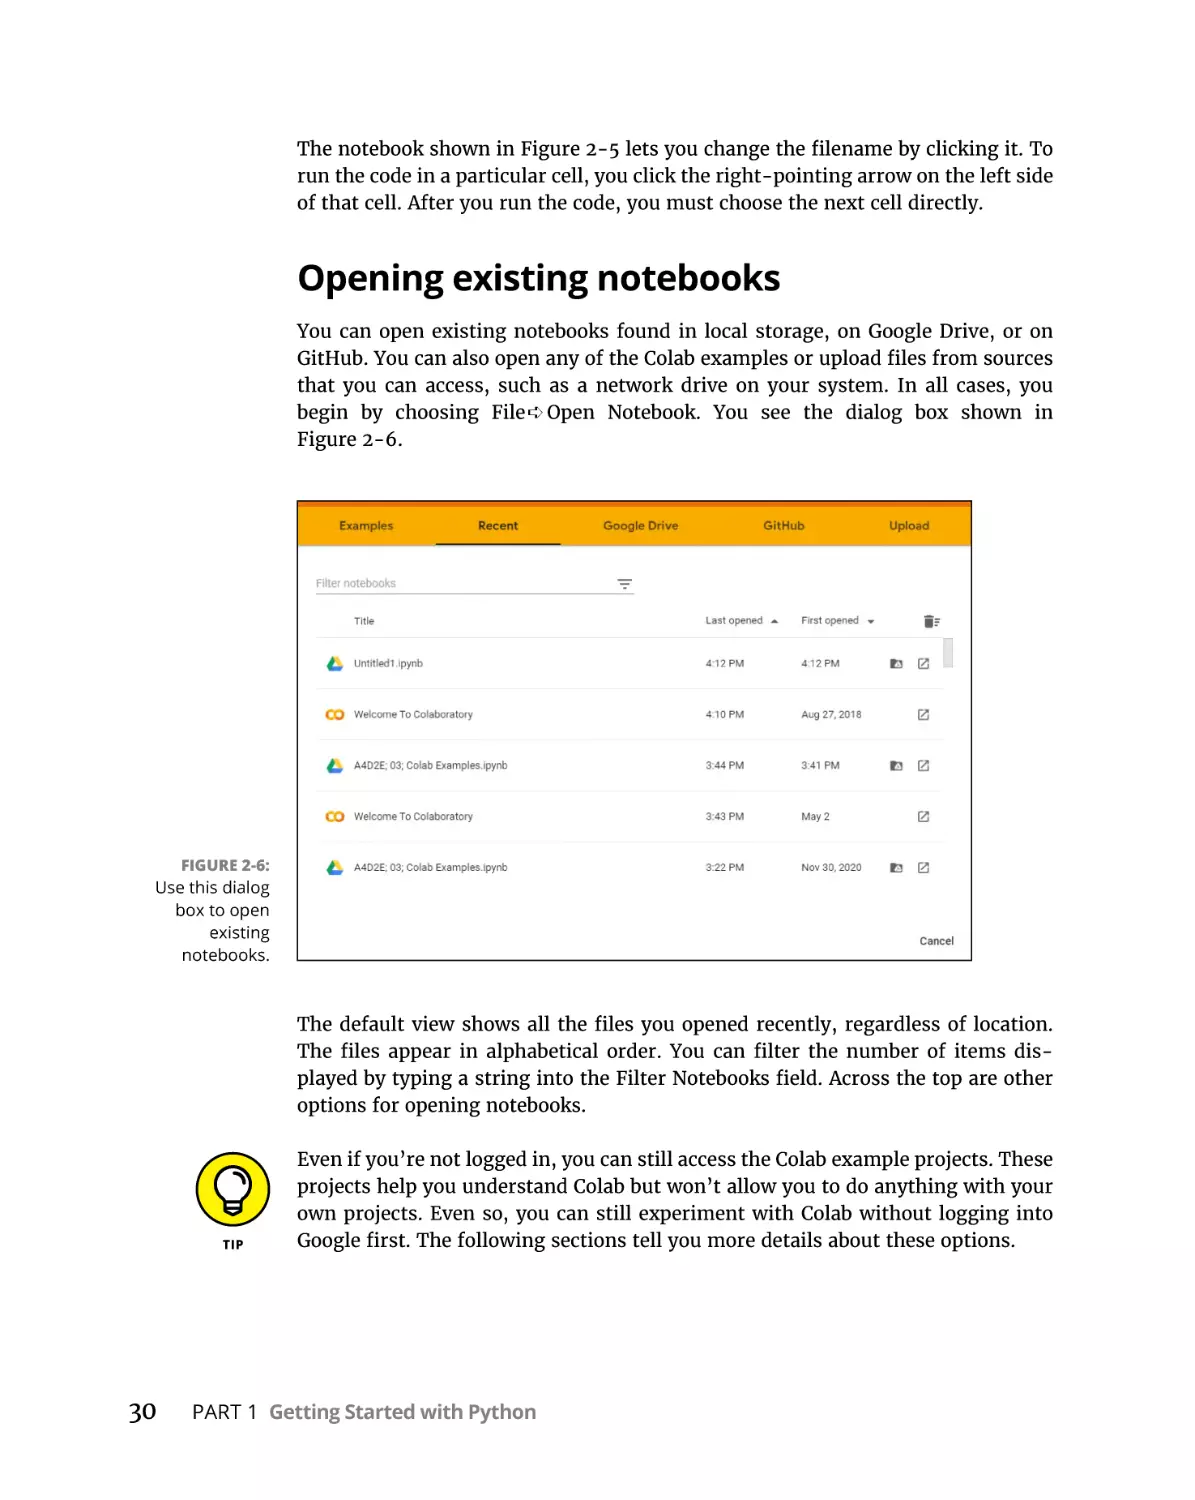 Opening existing notebooks